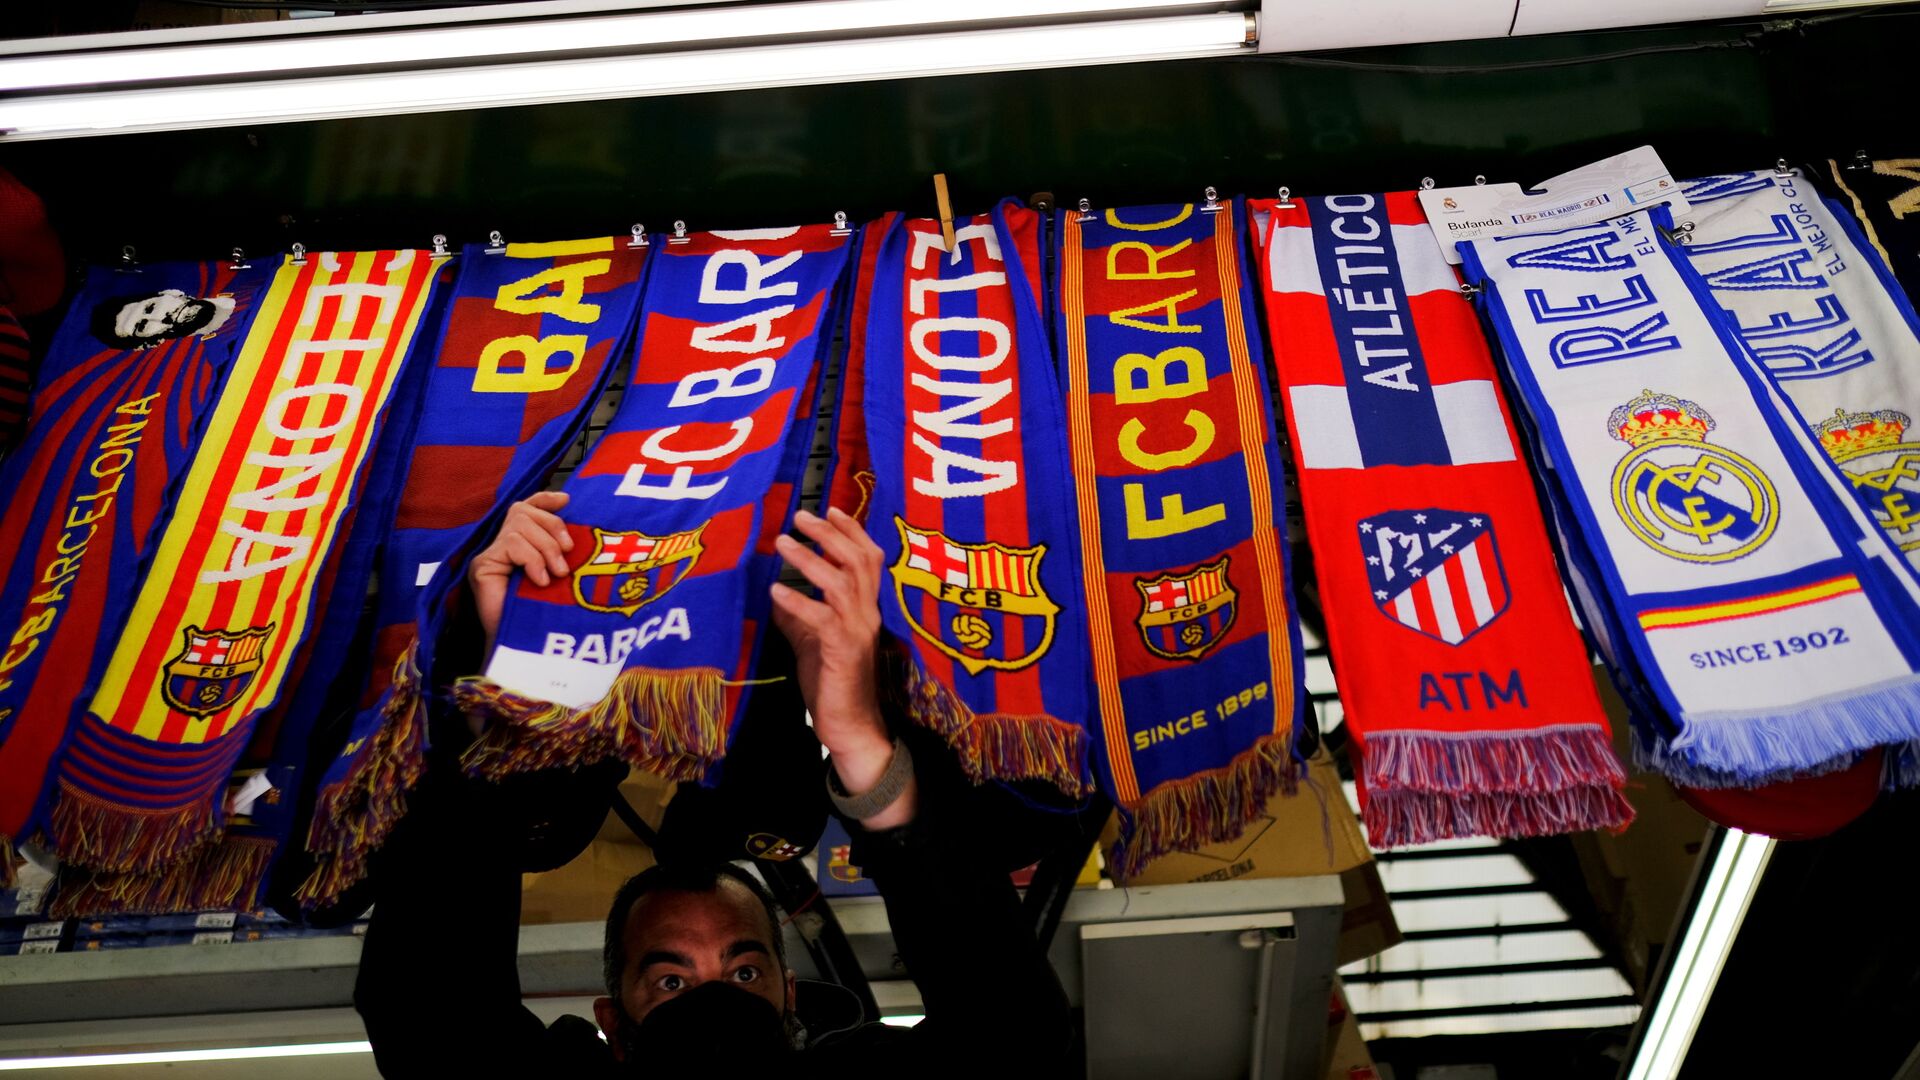 Soccer Football - FC Barcelona, Atletico Madrid and Real Madrid scarves are displayed inside a store at Las Ramblas as twelve of Europe's top football clubs launch a breakaway Super League - Barcelona, Spain - April 19, 2021 - اسپوتنیک افغانستان  , 1920, 11.03.2022